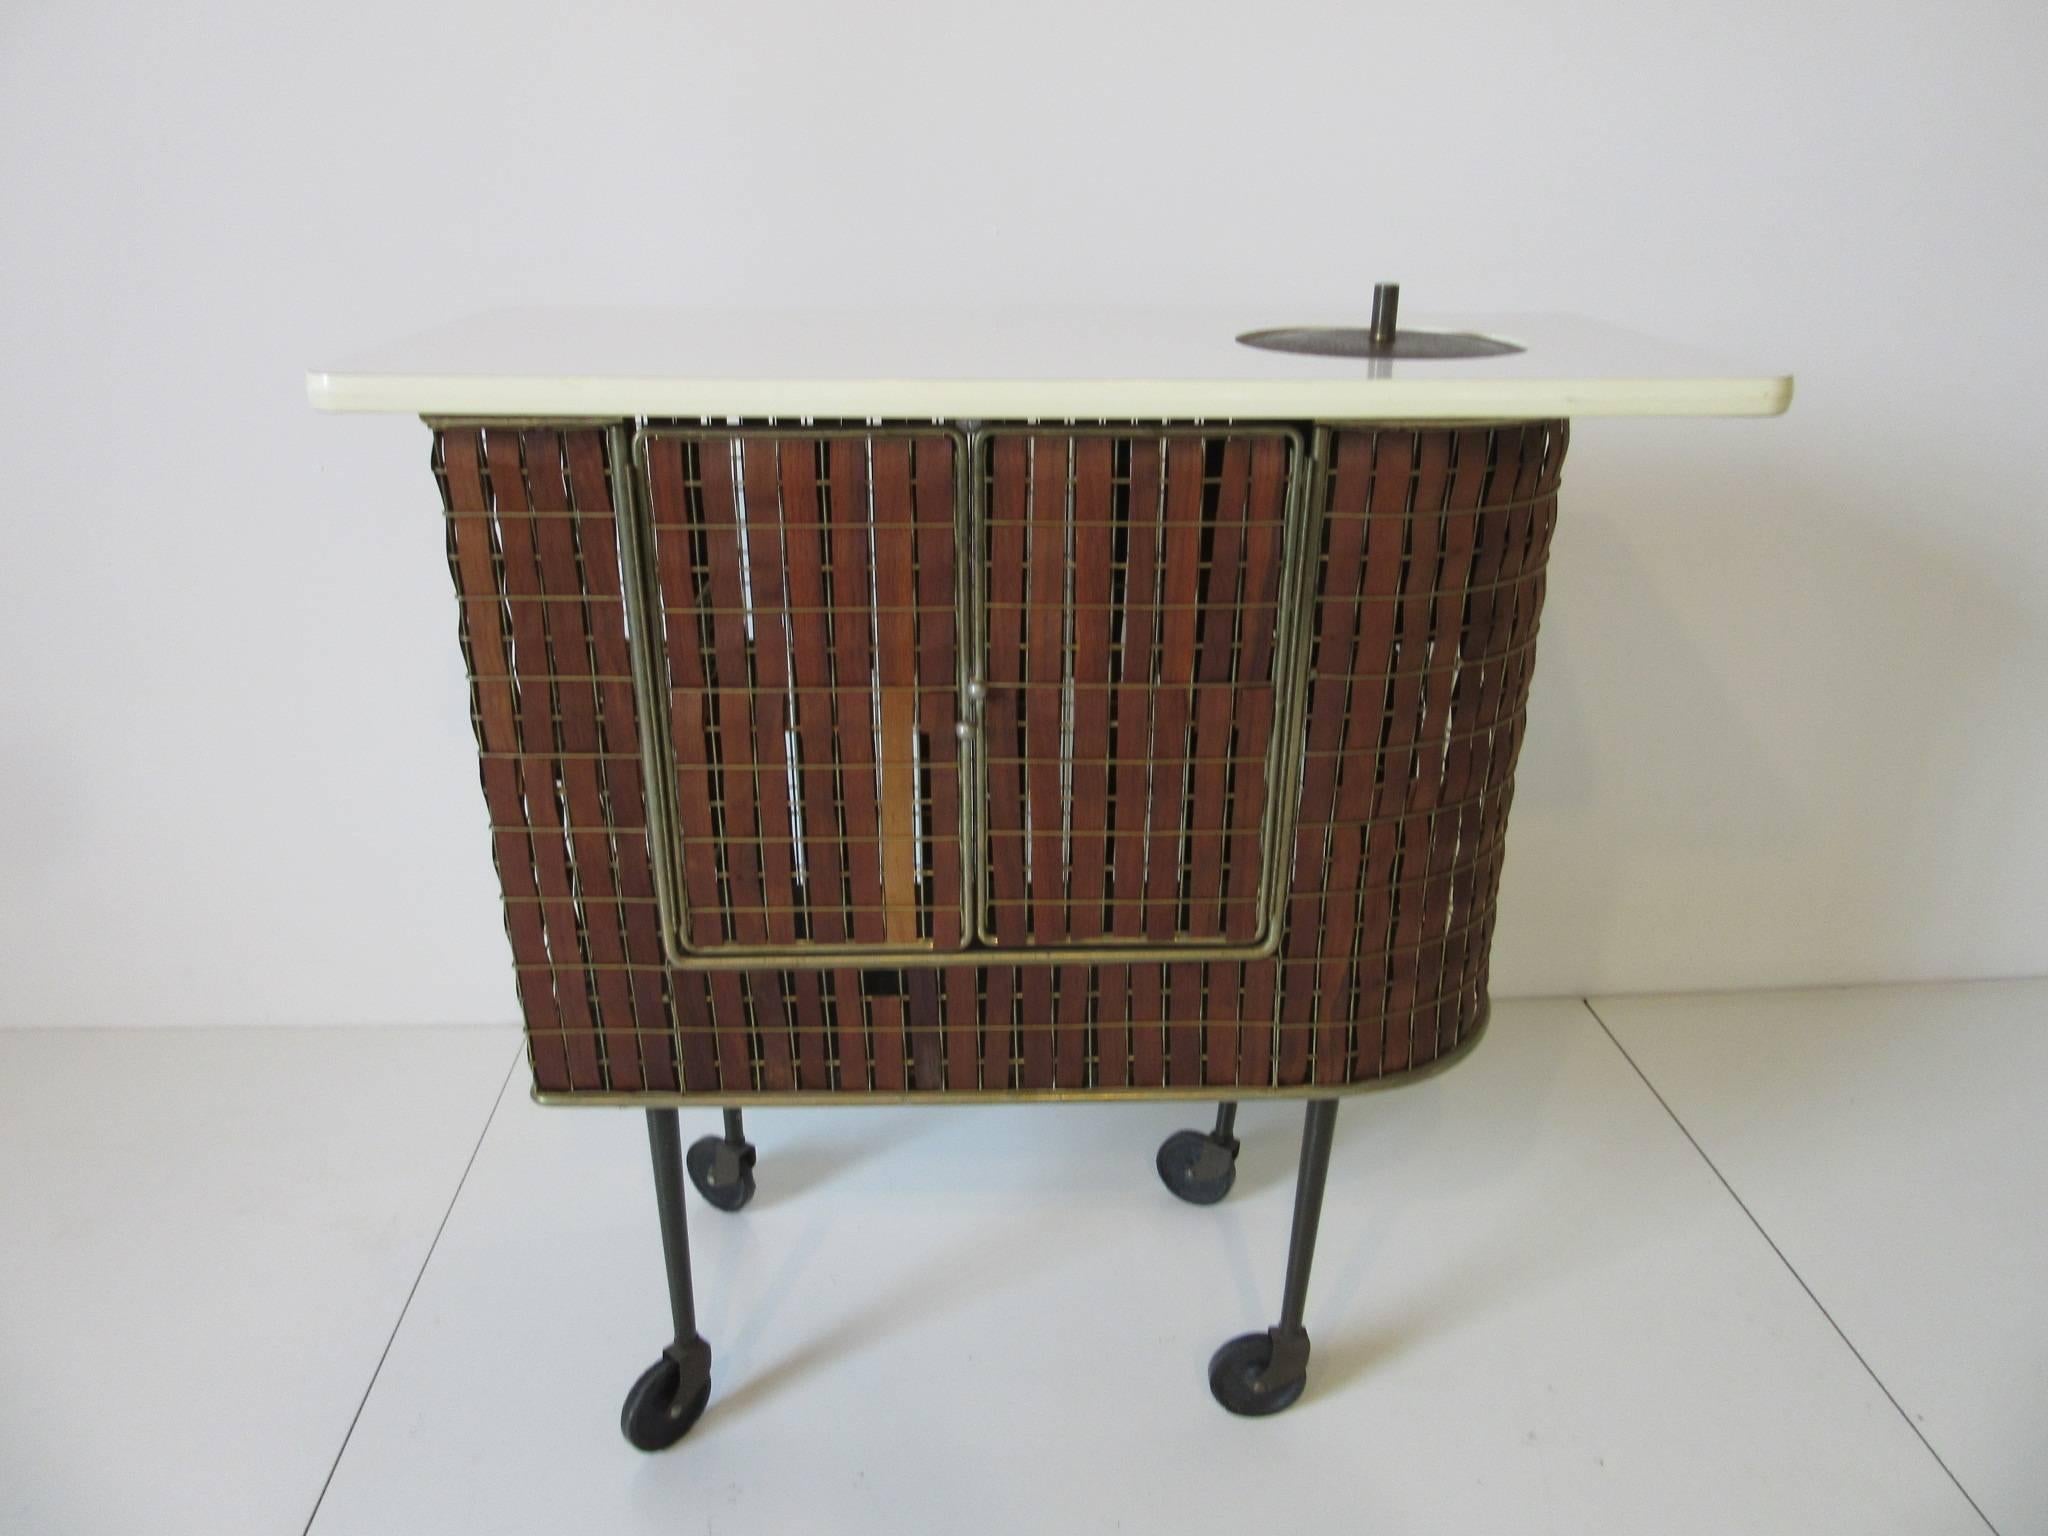 A early Tony Paul rolling bar cart called a Barmobile with white Formica top, built - in three quart ice bucket with lid and brass toned frame and teak woven strips. The backside double doors having a magnetic latch with storage inside , racks for